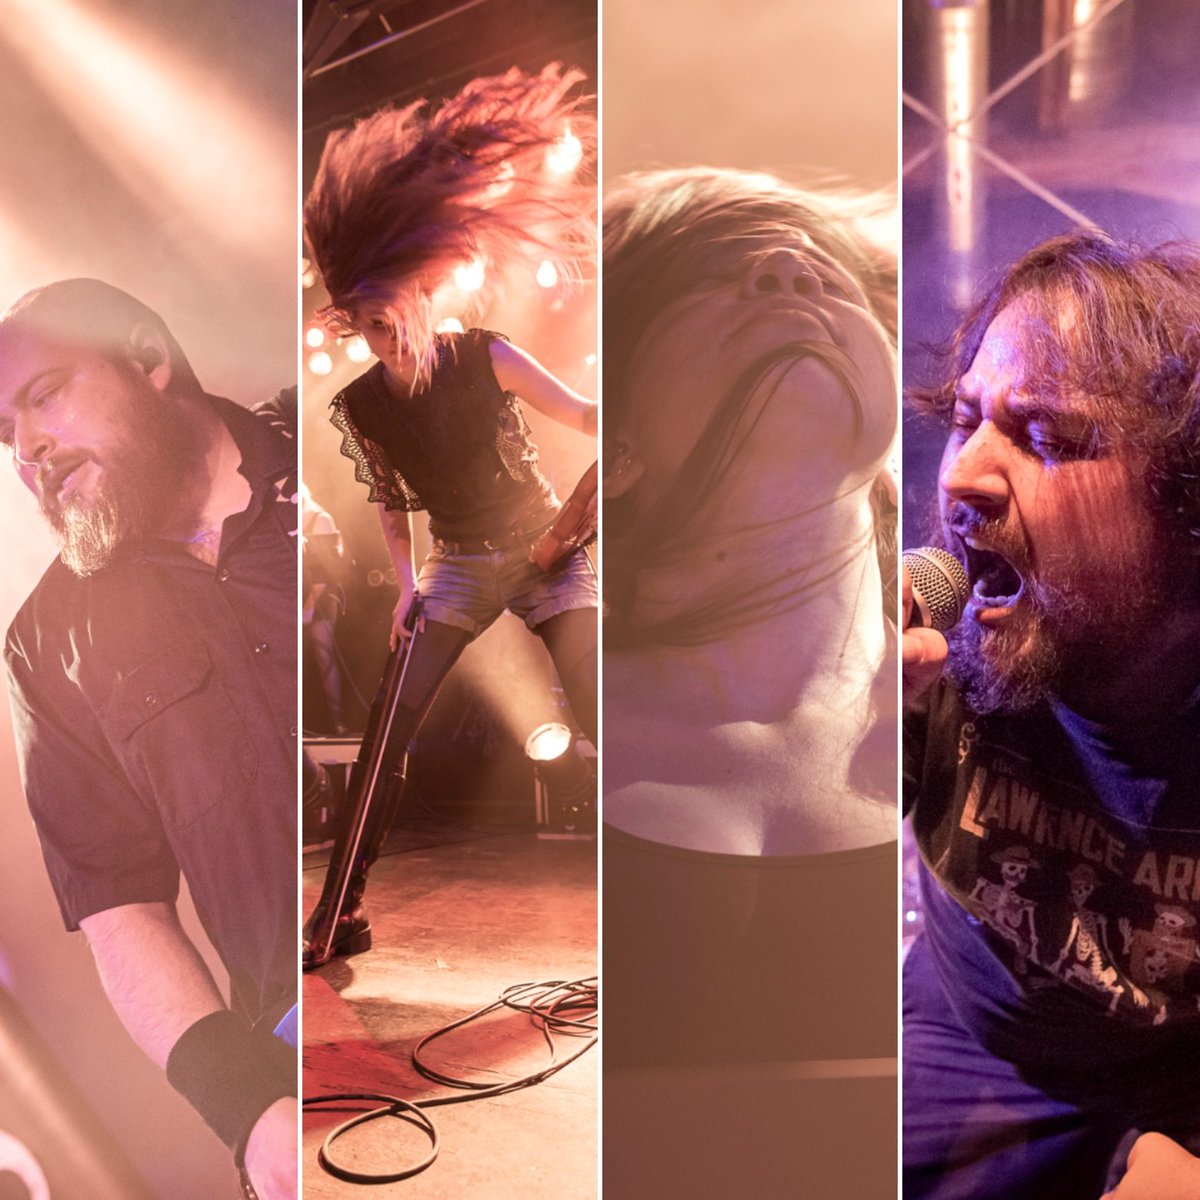 Check out these great shots from @plekvetica, taken last Saturday during our final show in Lucerne! We had an amazing time on stage 🤘#abinchova #folkmetal #melodicdeathmetal #swissmetal #finalshow #farewellshow